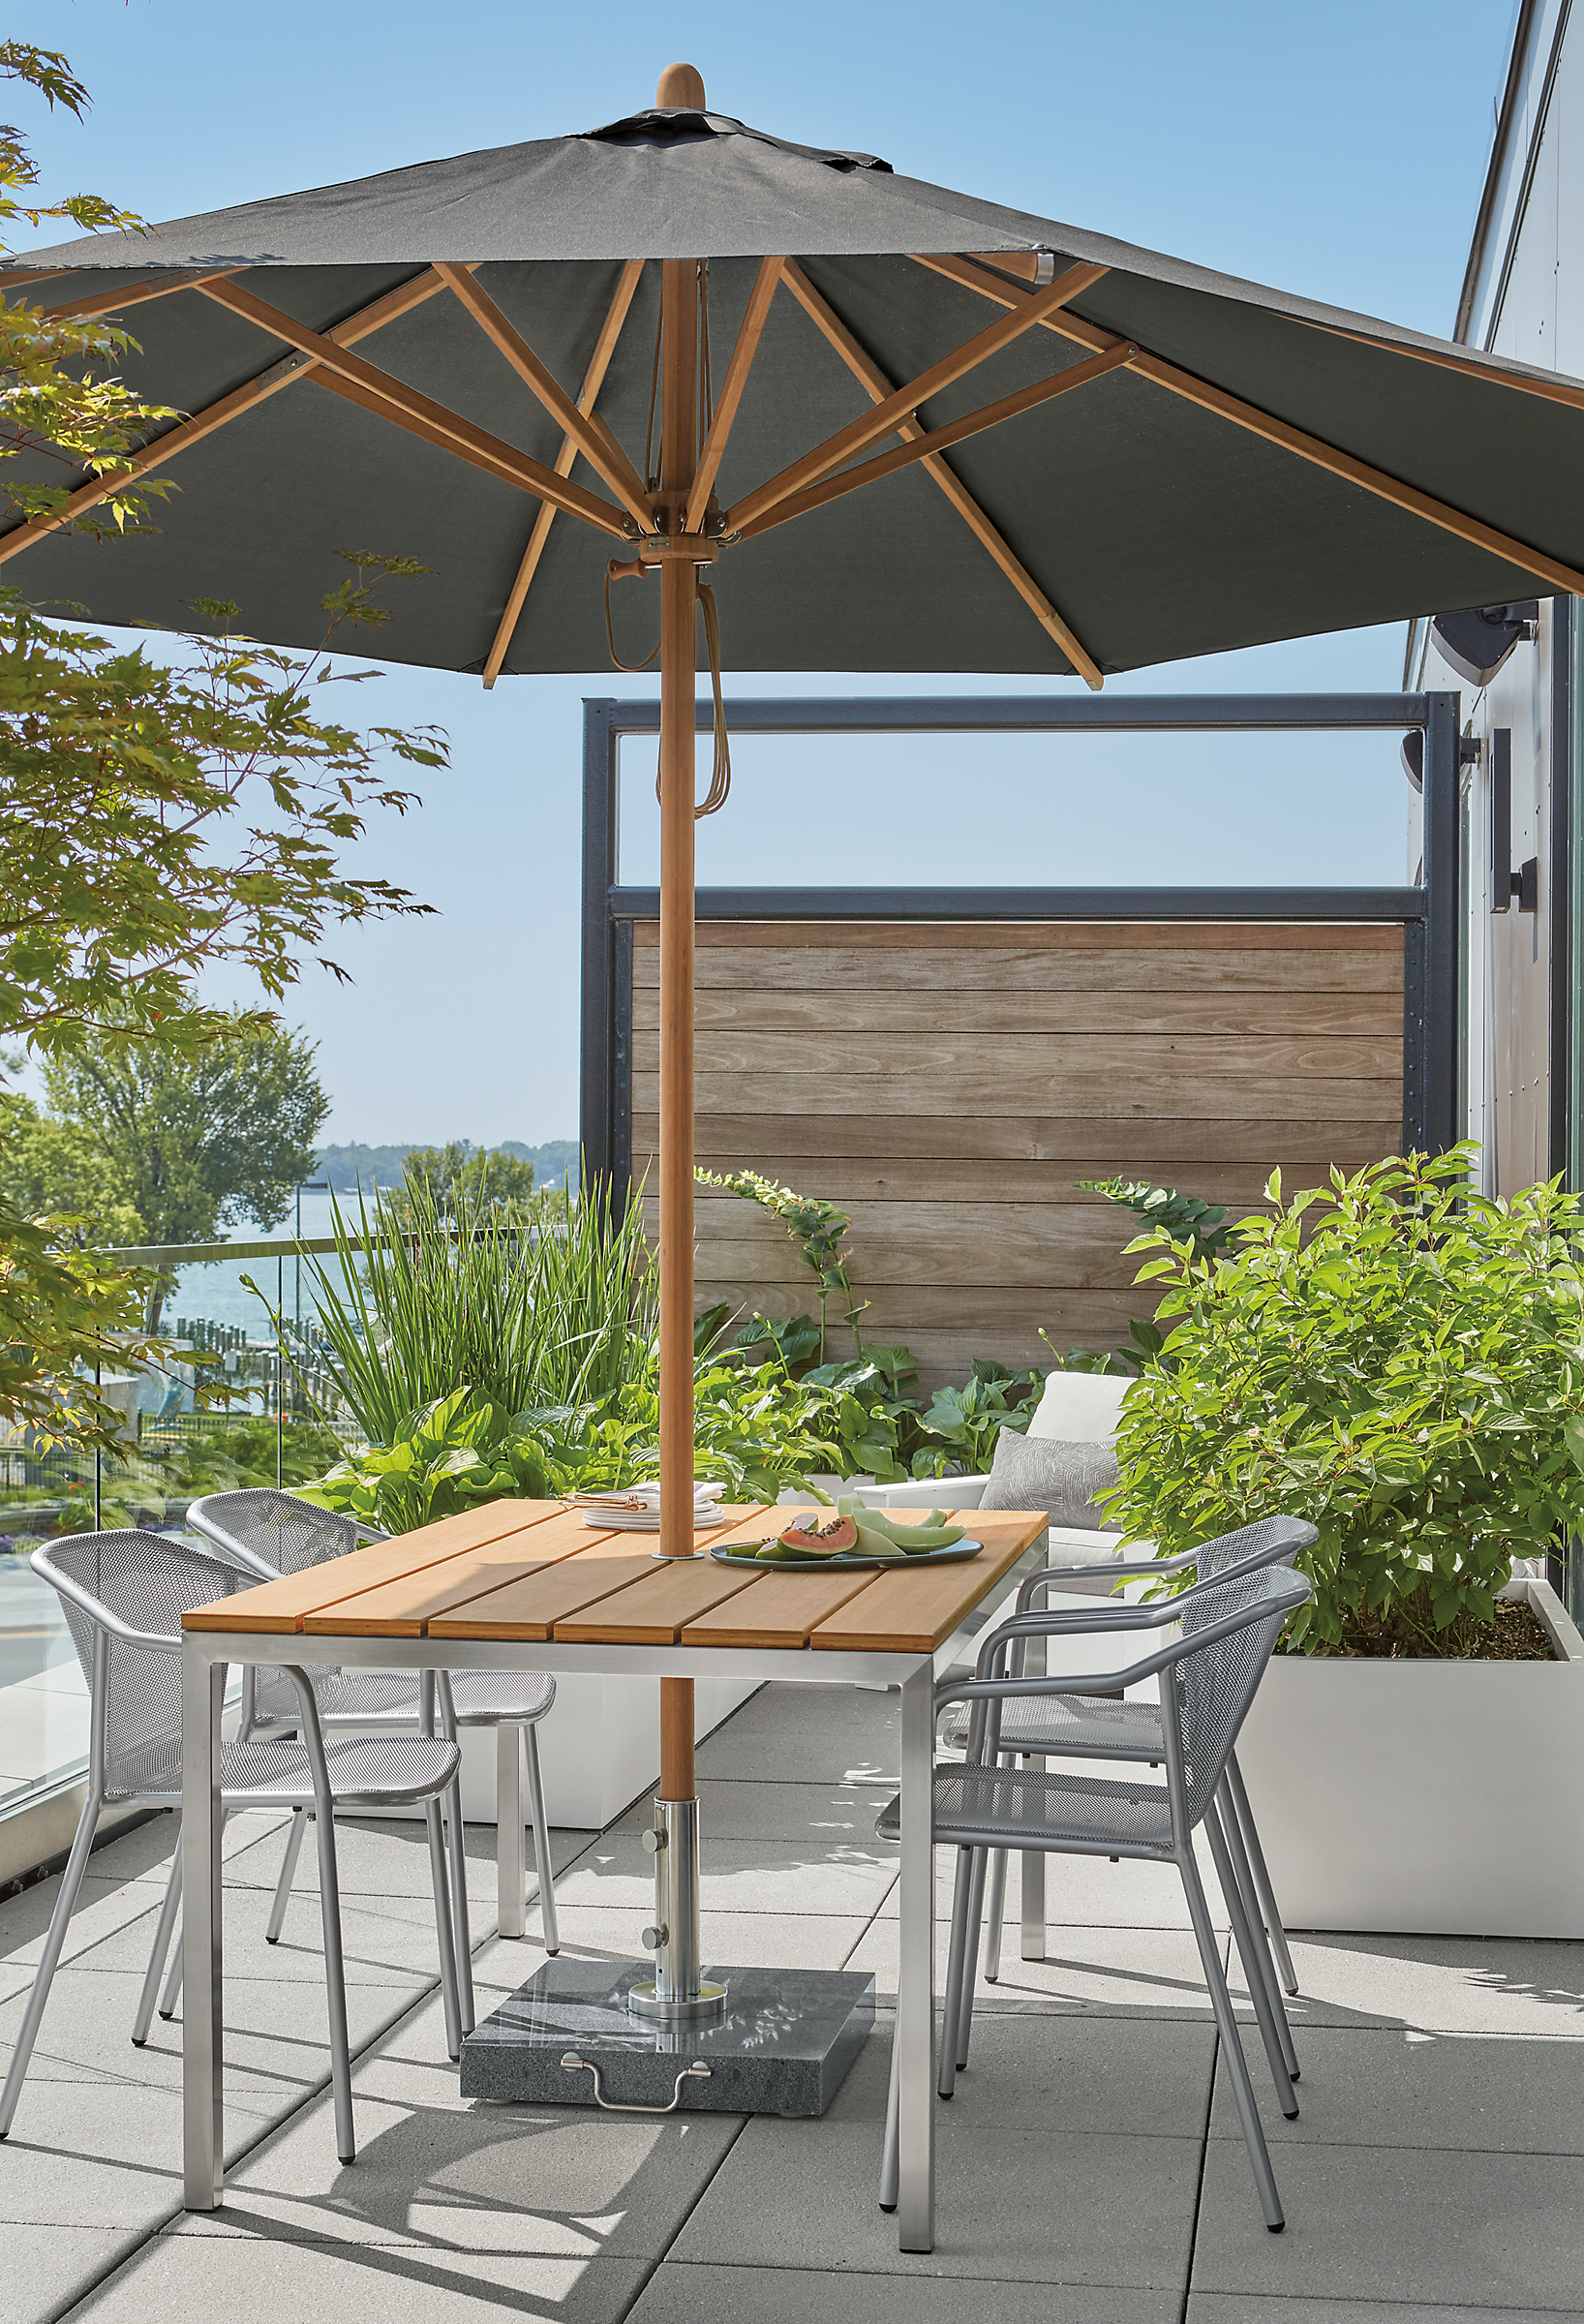 Parsons 60-wide outdoor table, Theo chairs and Cirro patio umbrella.